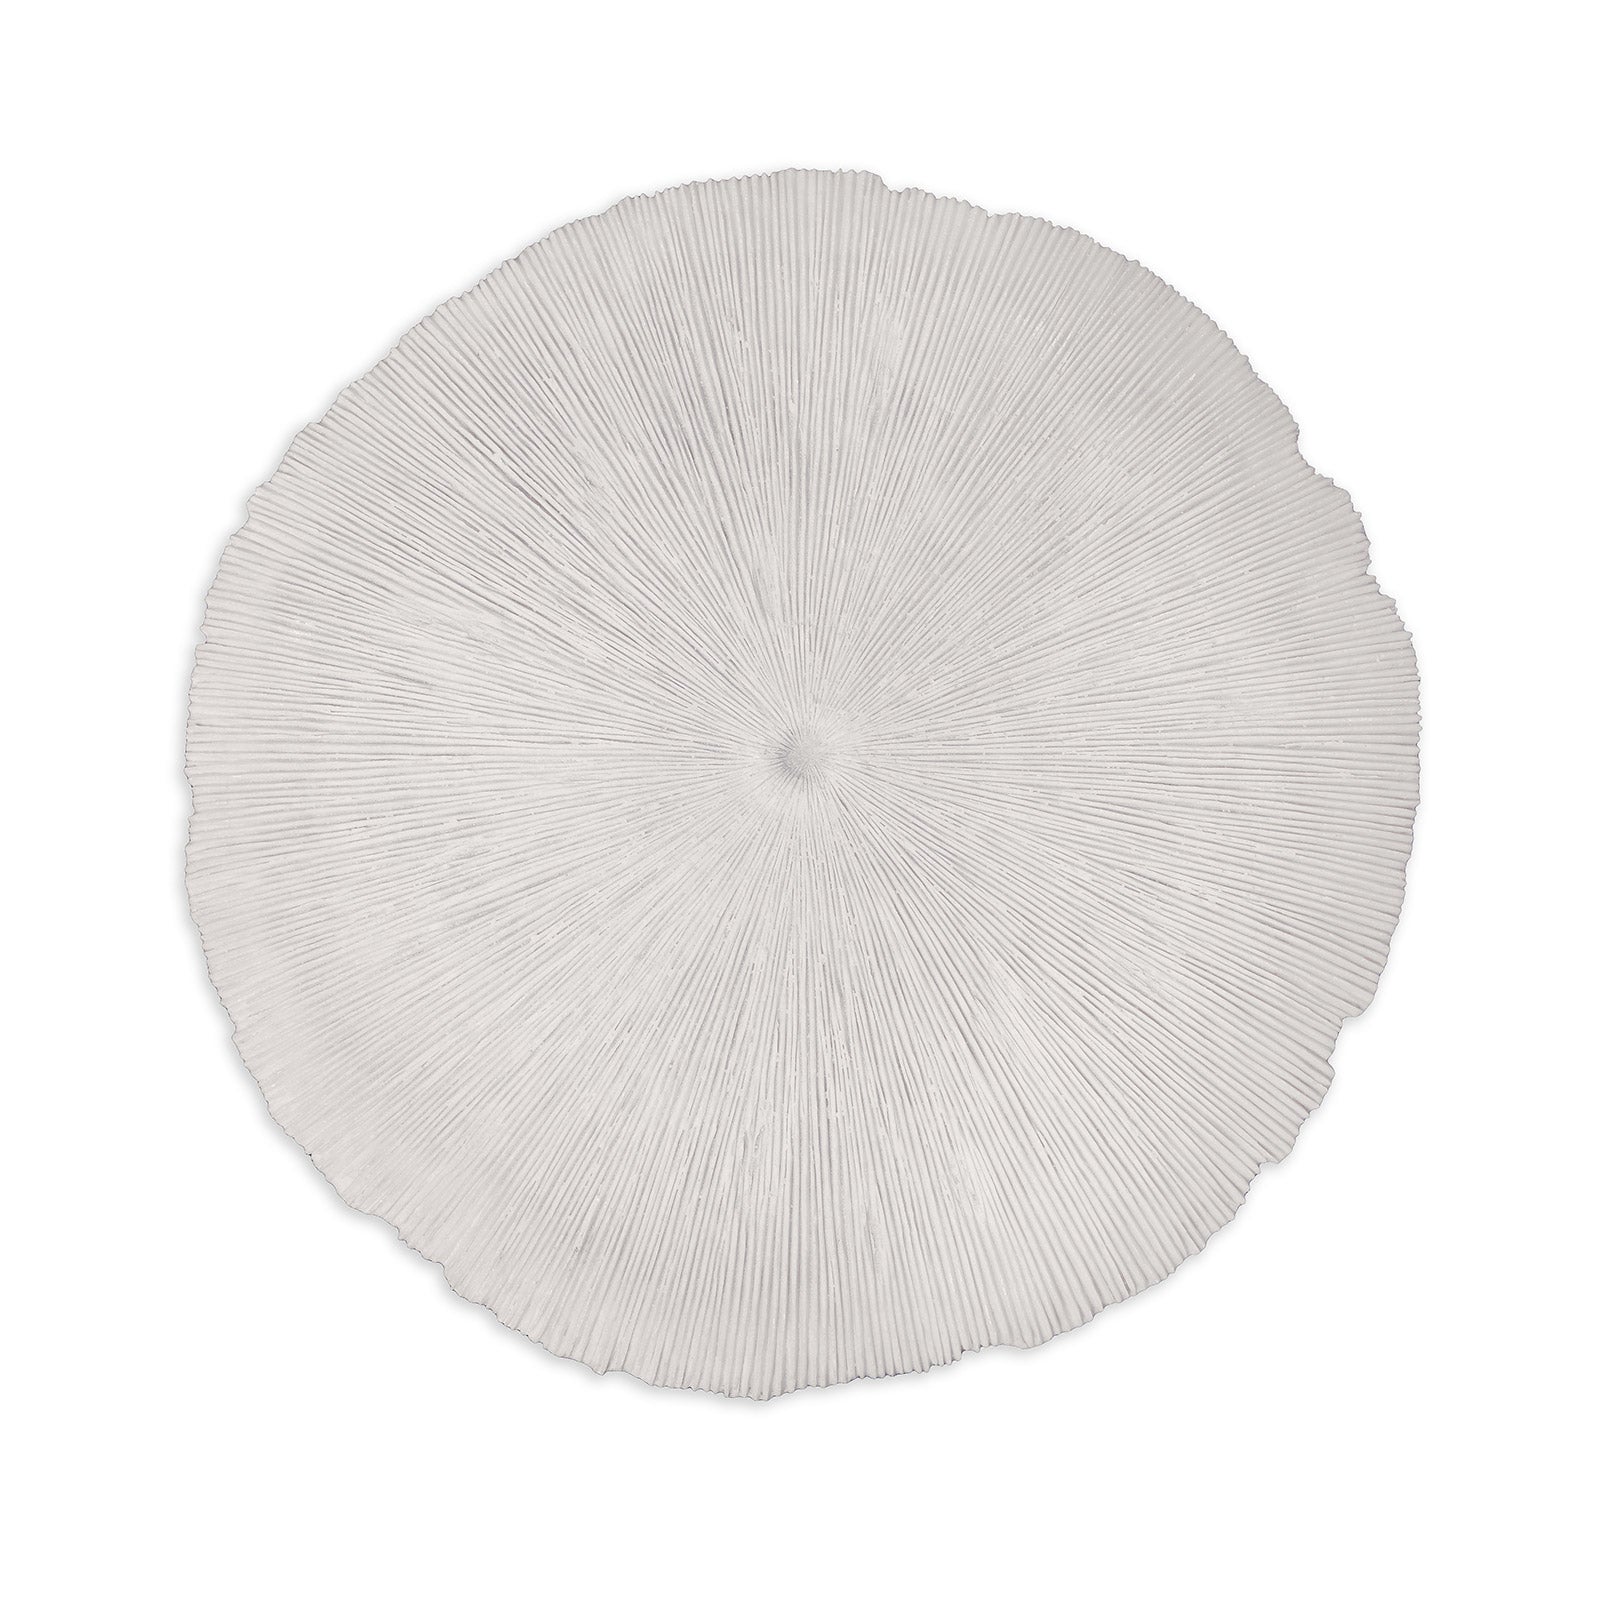 Picture of Sand Dollar - Large